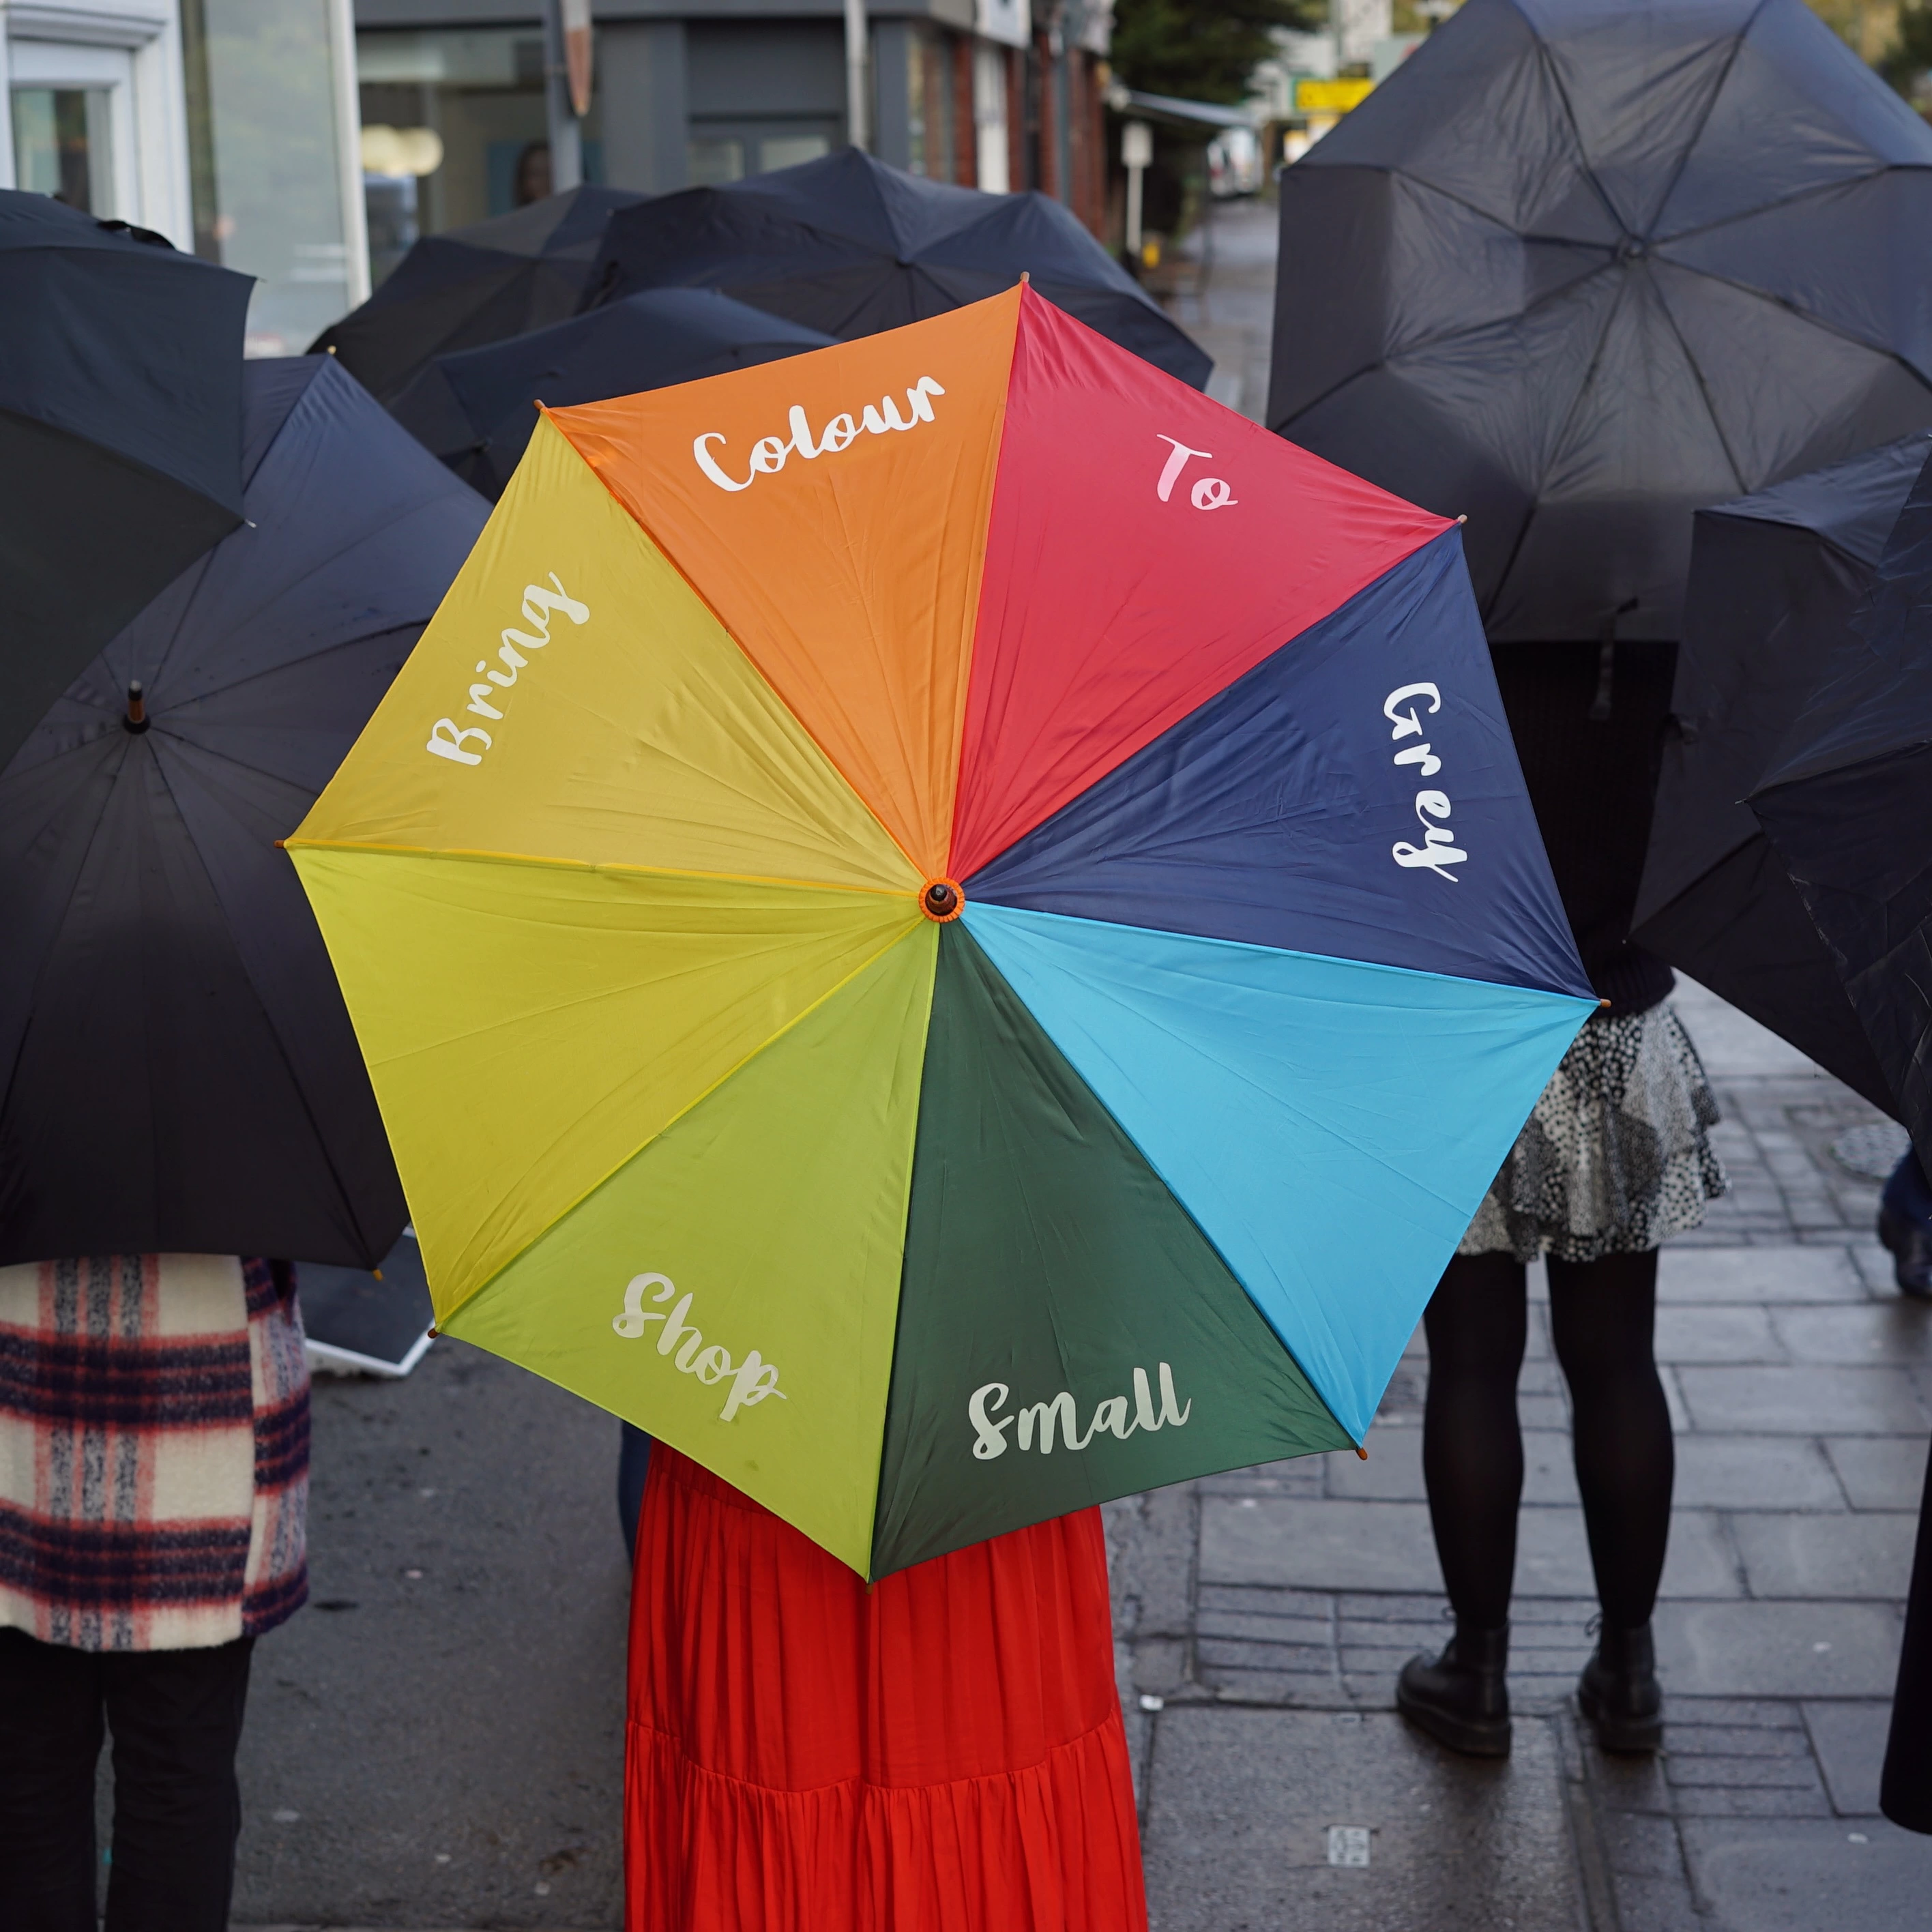 A colourful umbrella amongst many black umbrellas that says 'Bring Colour to Grey'